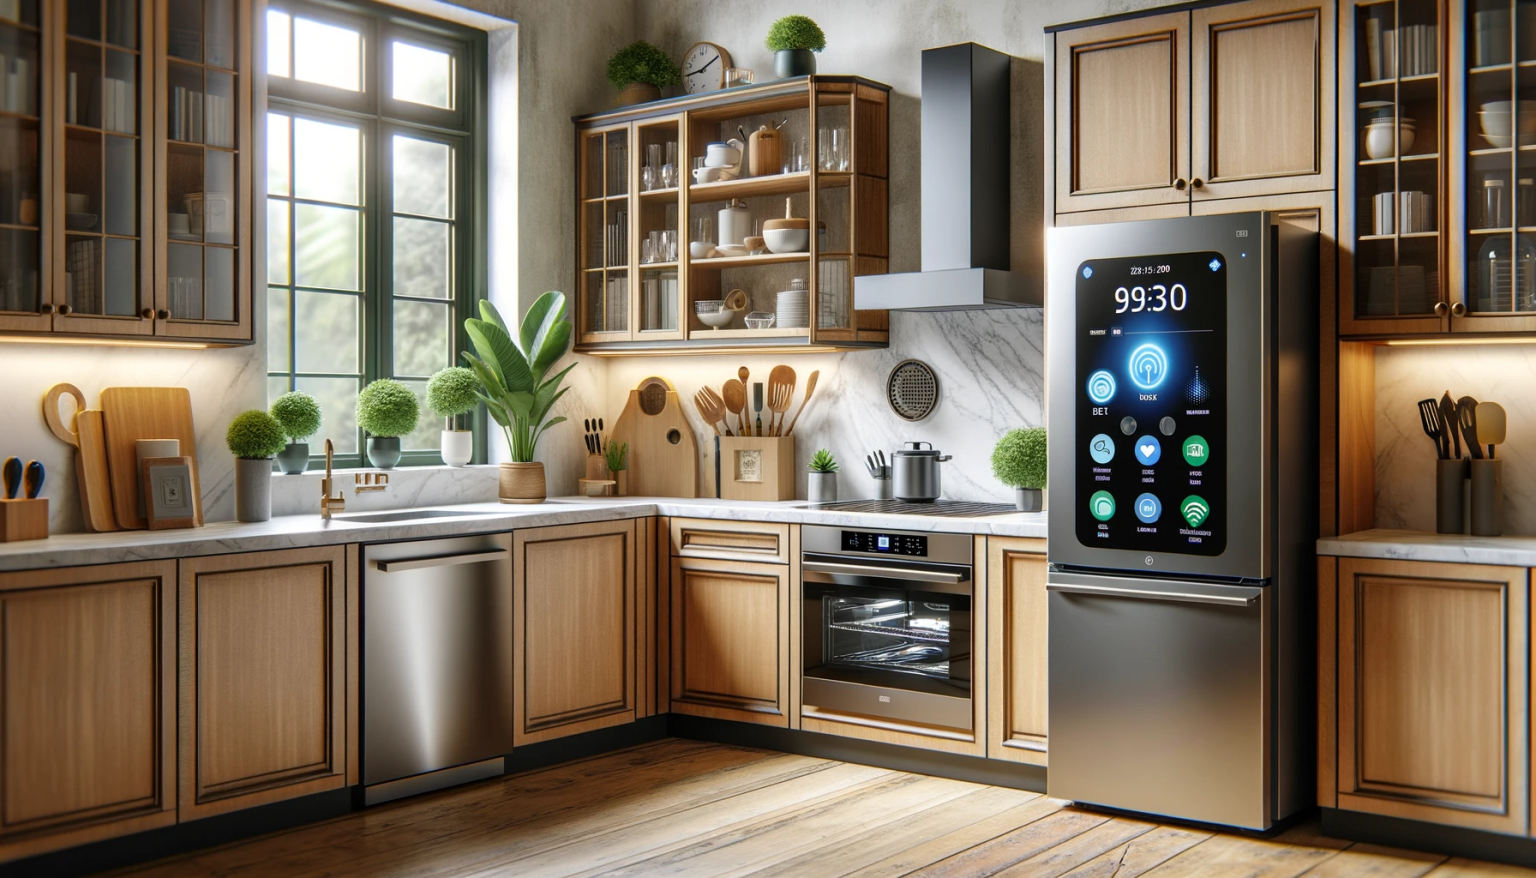 10 Best Smart Appliances That Help Water Conservation - Sustainably Forward